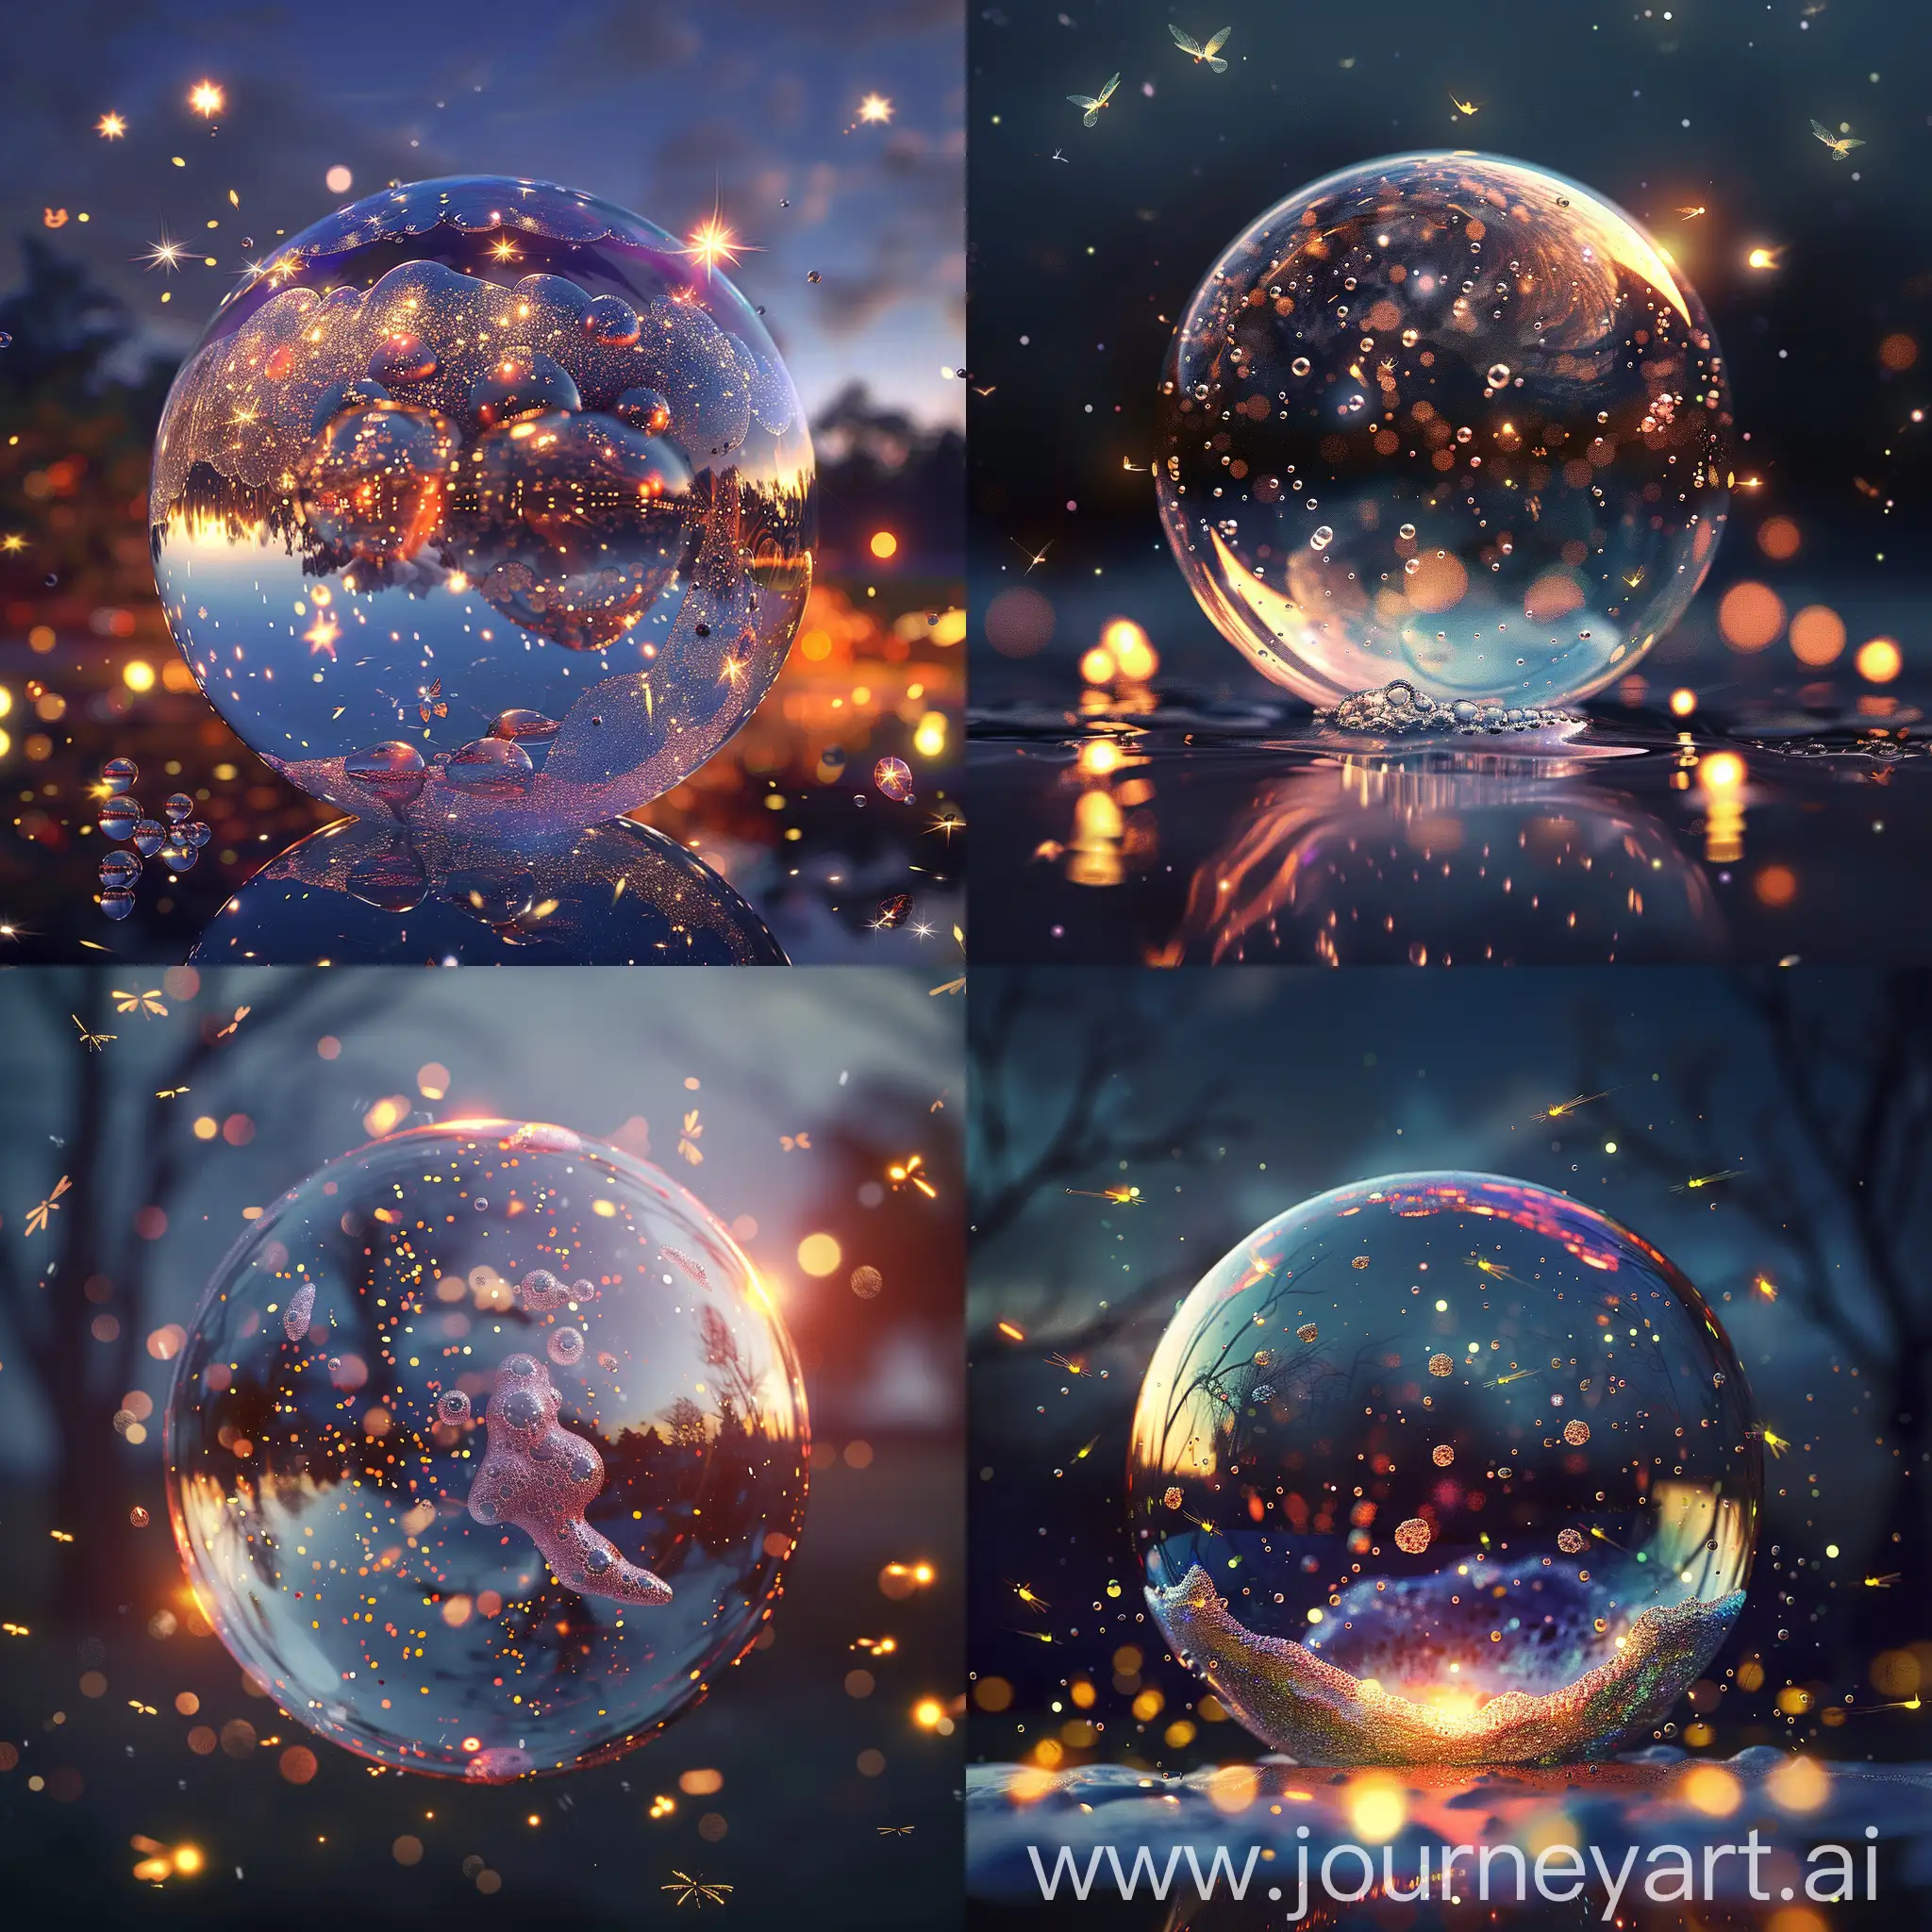 A hyper-realistic digital artwork of an adorable cute soap bubble, dense and textured, with tiny sparkling particles under a dimly lit night sky. Fireflies gently fall around it, adding to the magical, serene atmosphere.